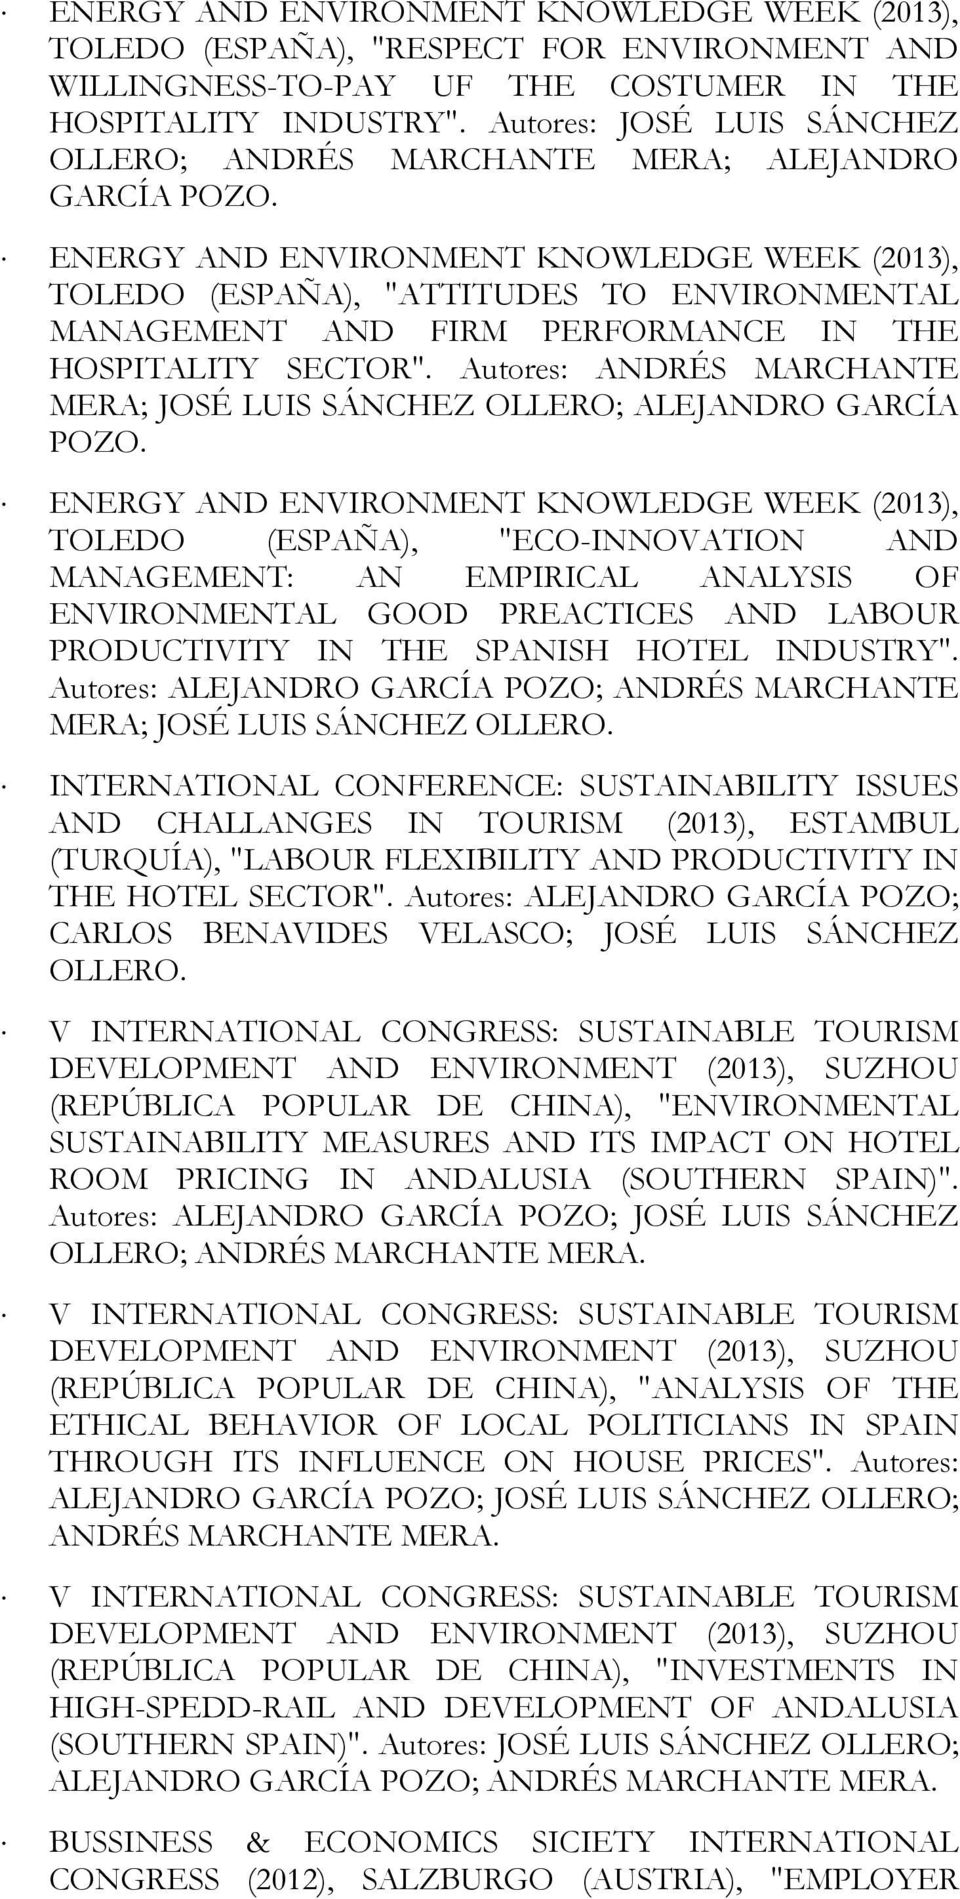 ENERGY AND ENVIRONMENT KNOWLEDGE WEEK (2013), TOLEDO (ESPAÑA), "ATTITUDES TO ENVIRONMENTAL MANAGEMENT AND FIRM PERFORMANCE IN THE HOSPITALITY SECTOR".